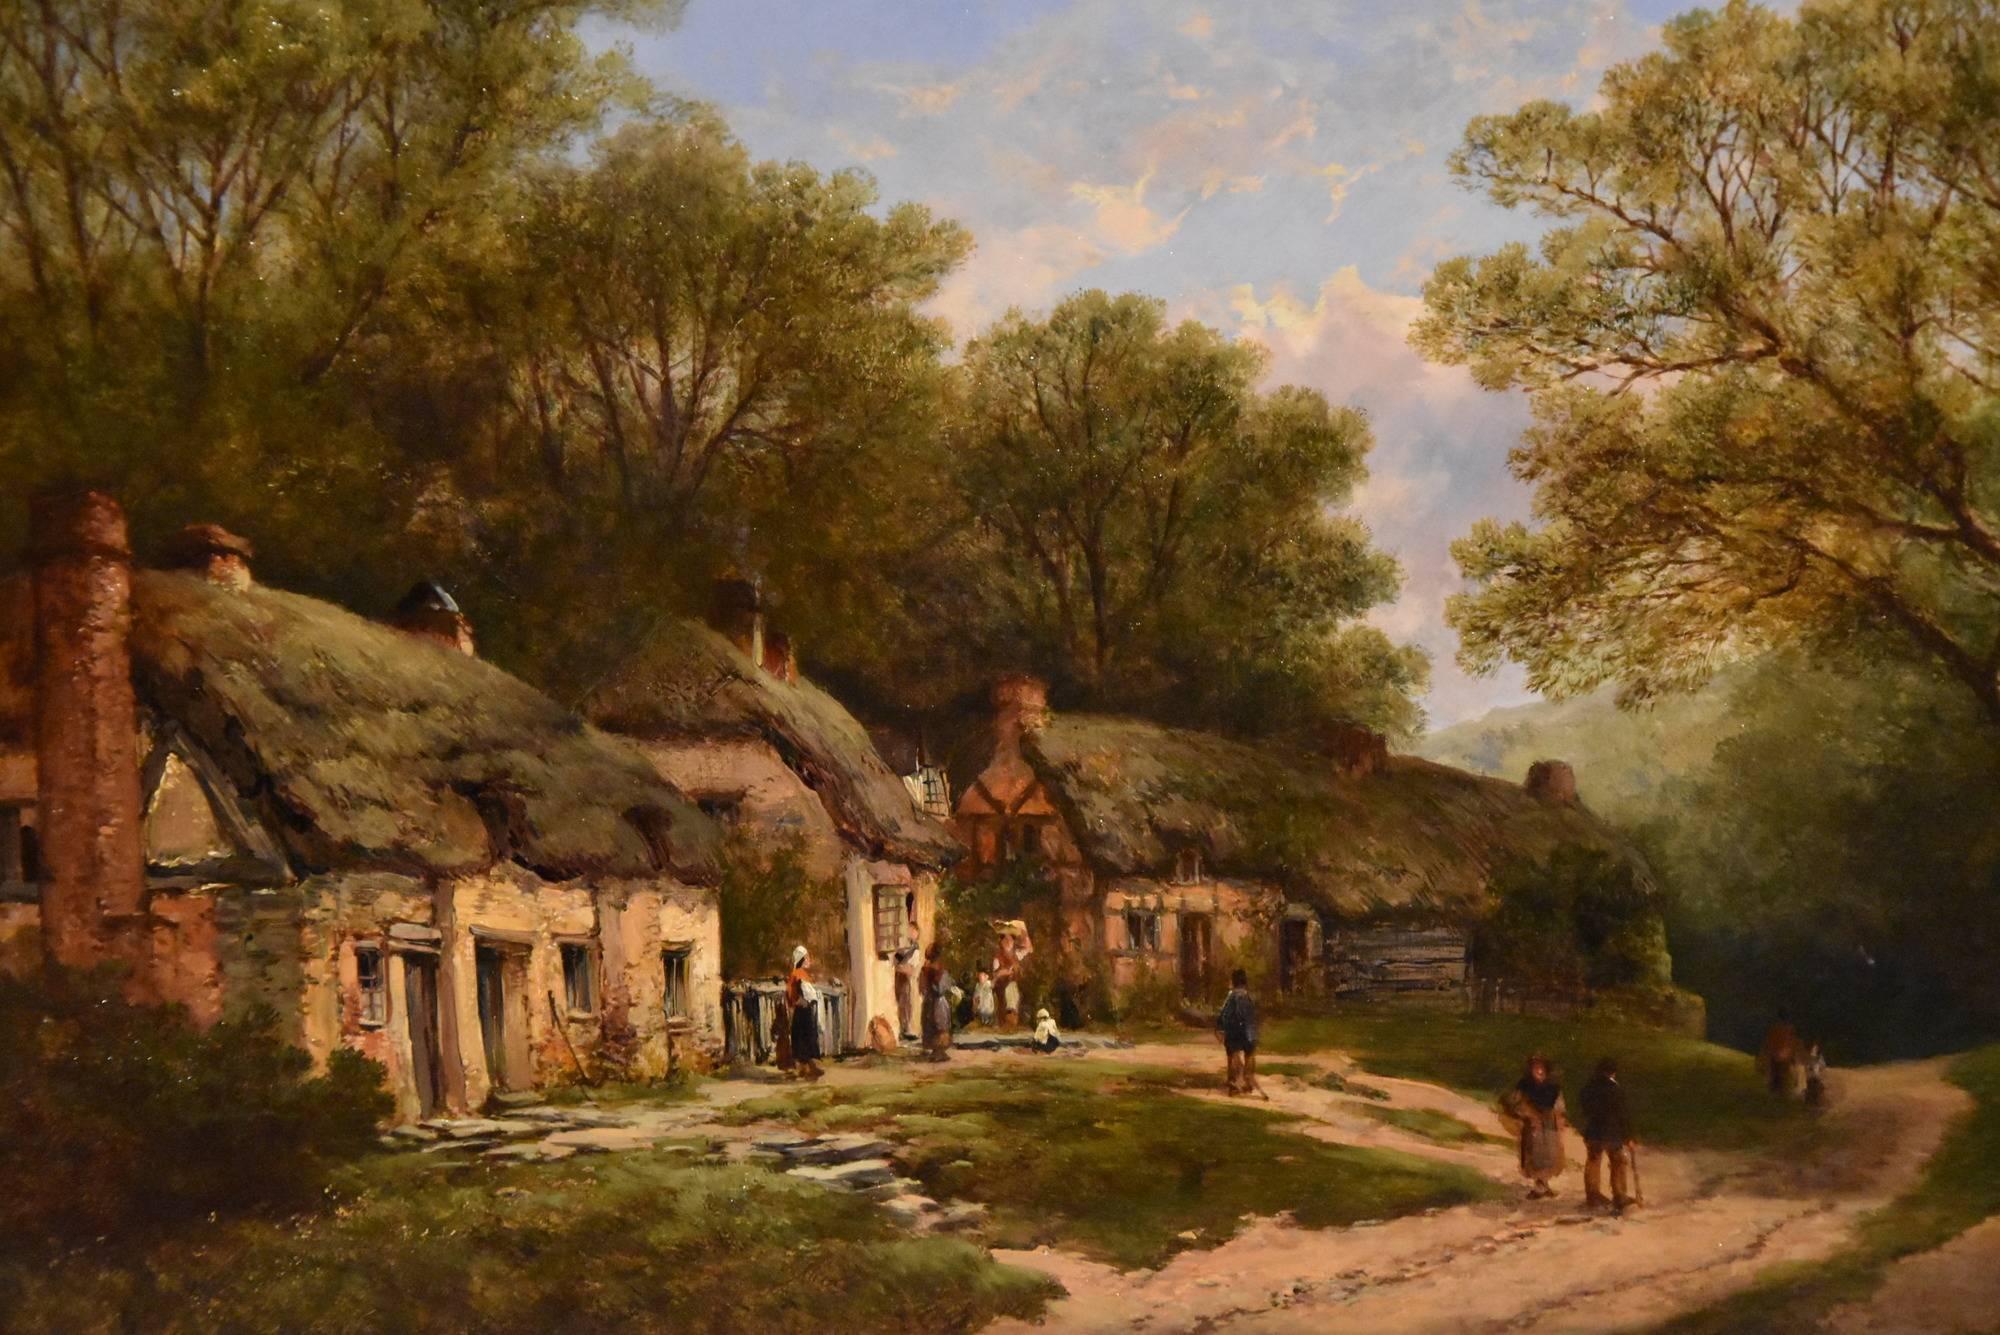 "Cottages at Toddenham Worcestshire" by William Pitt. William Pitt 1818-1900 was a fine midlands landscape painter of local scenes and south west views. A regular exhibitor at London and Birmingham. Oil on canvas. Signed and dated